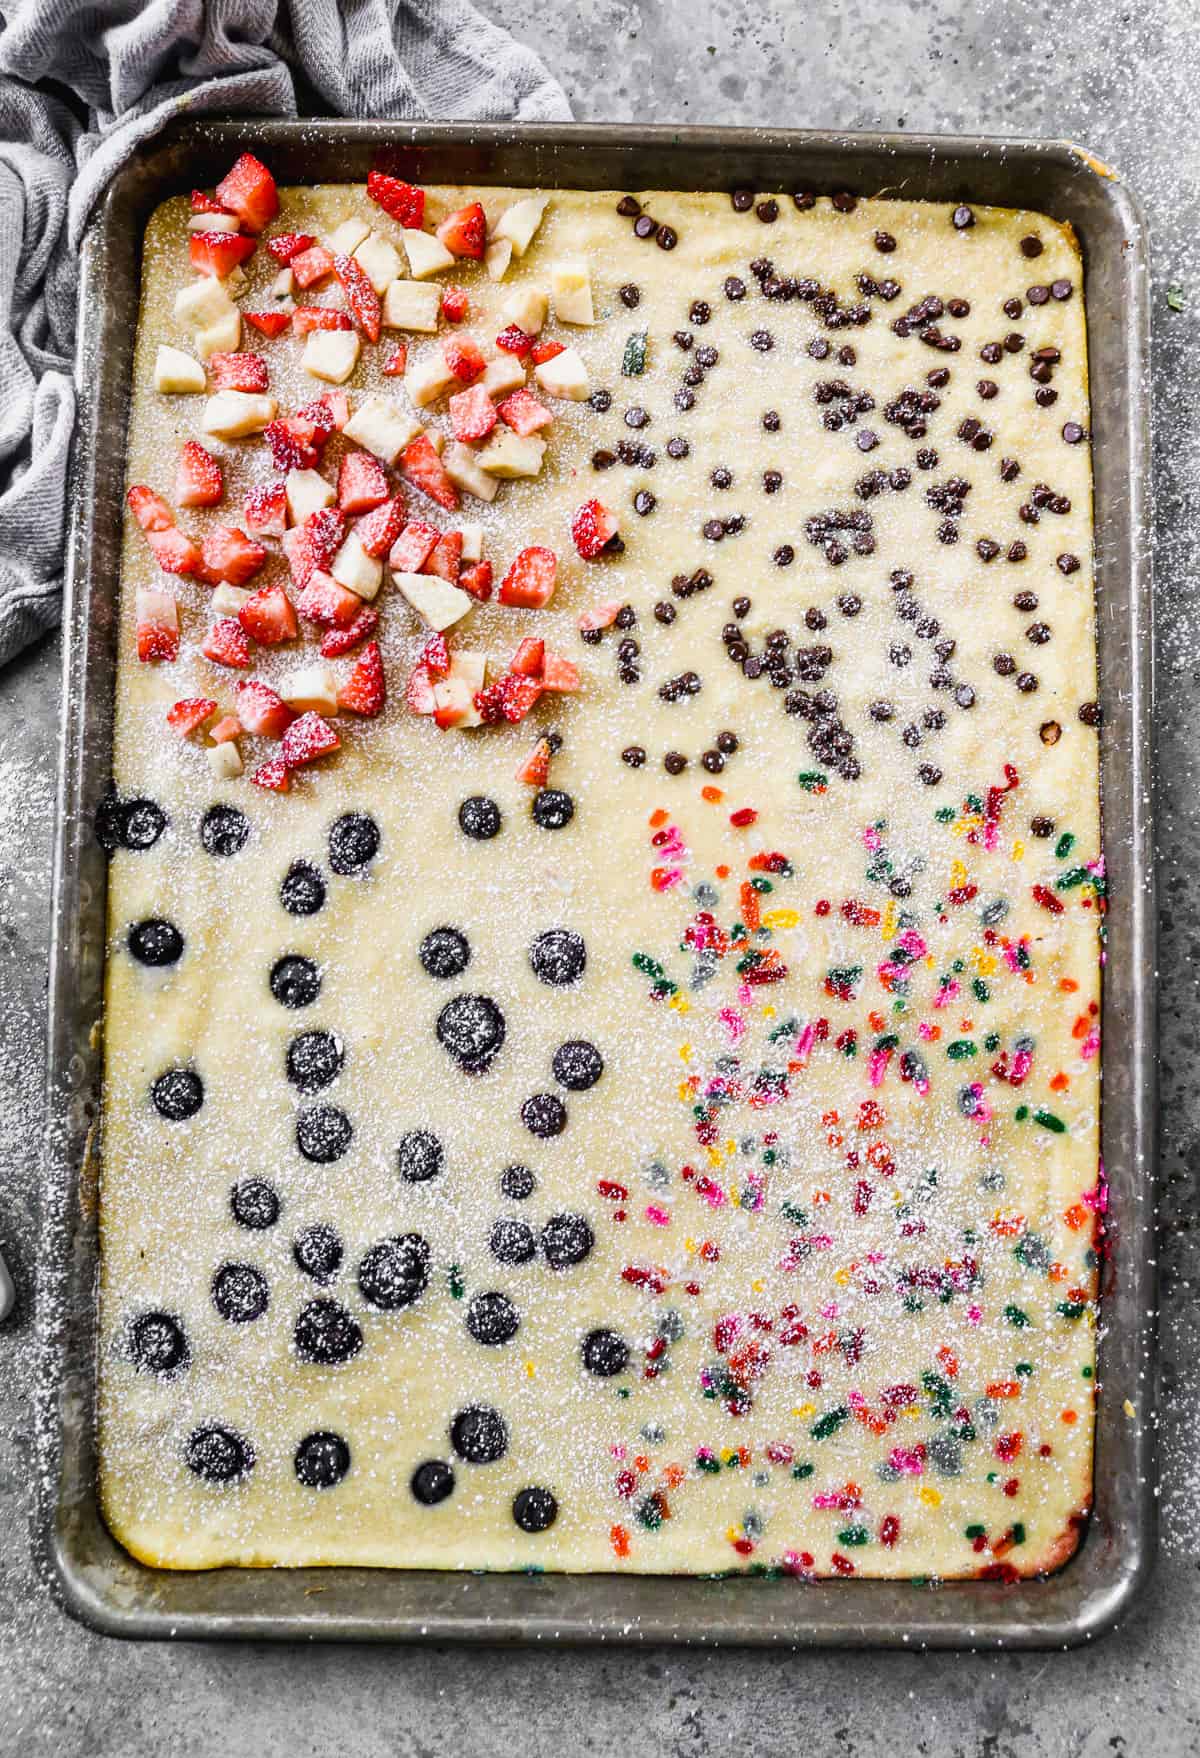 Easy Sheet Pan Pancakes divided into four quarters of flavors: sprinkles, blueberries, mini chocolate chips, and fresh strawberries and bananas. 